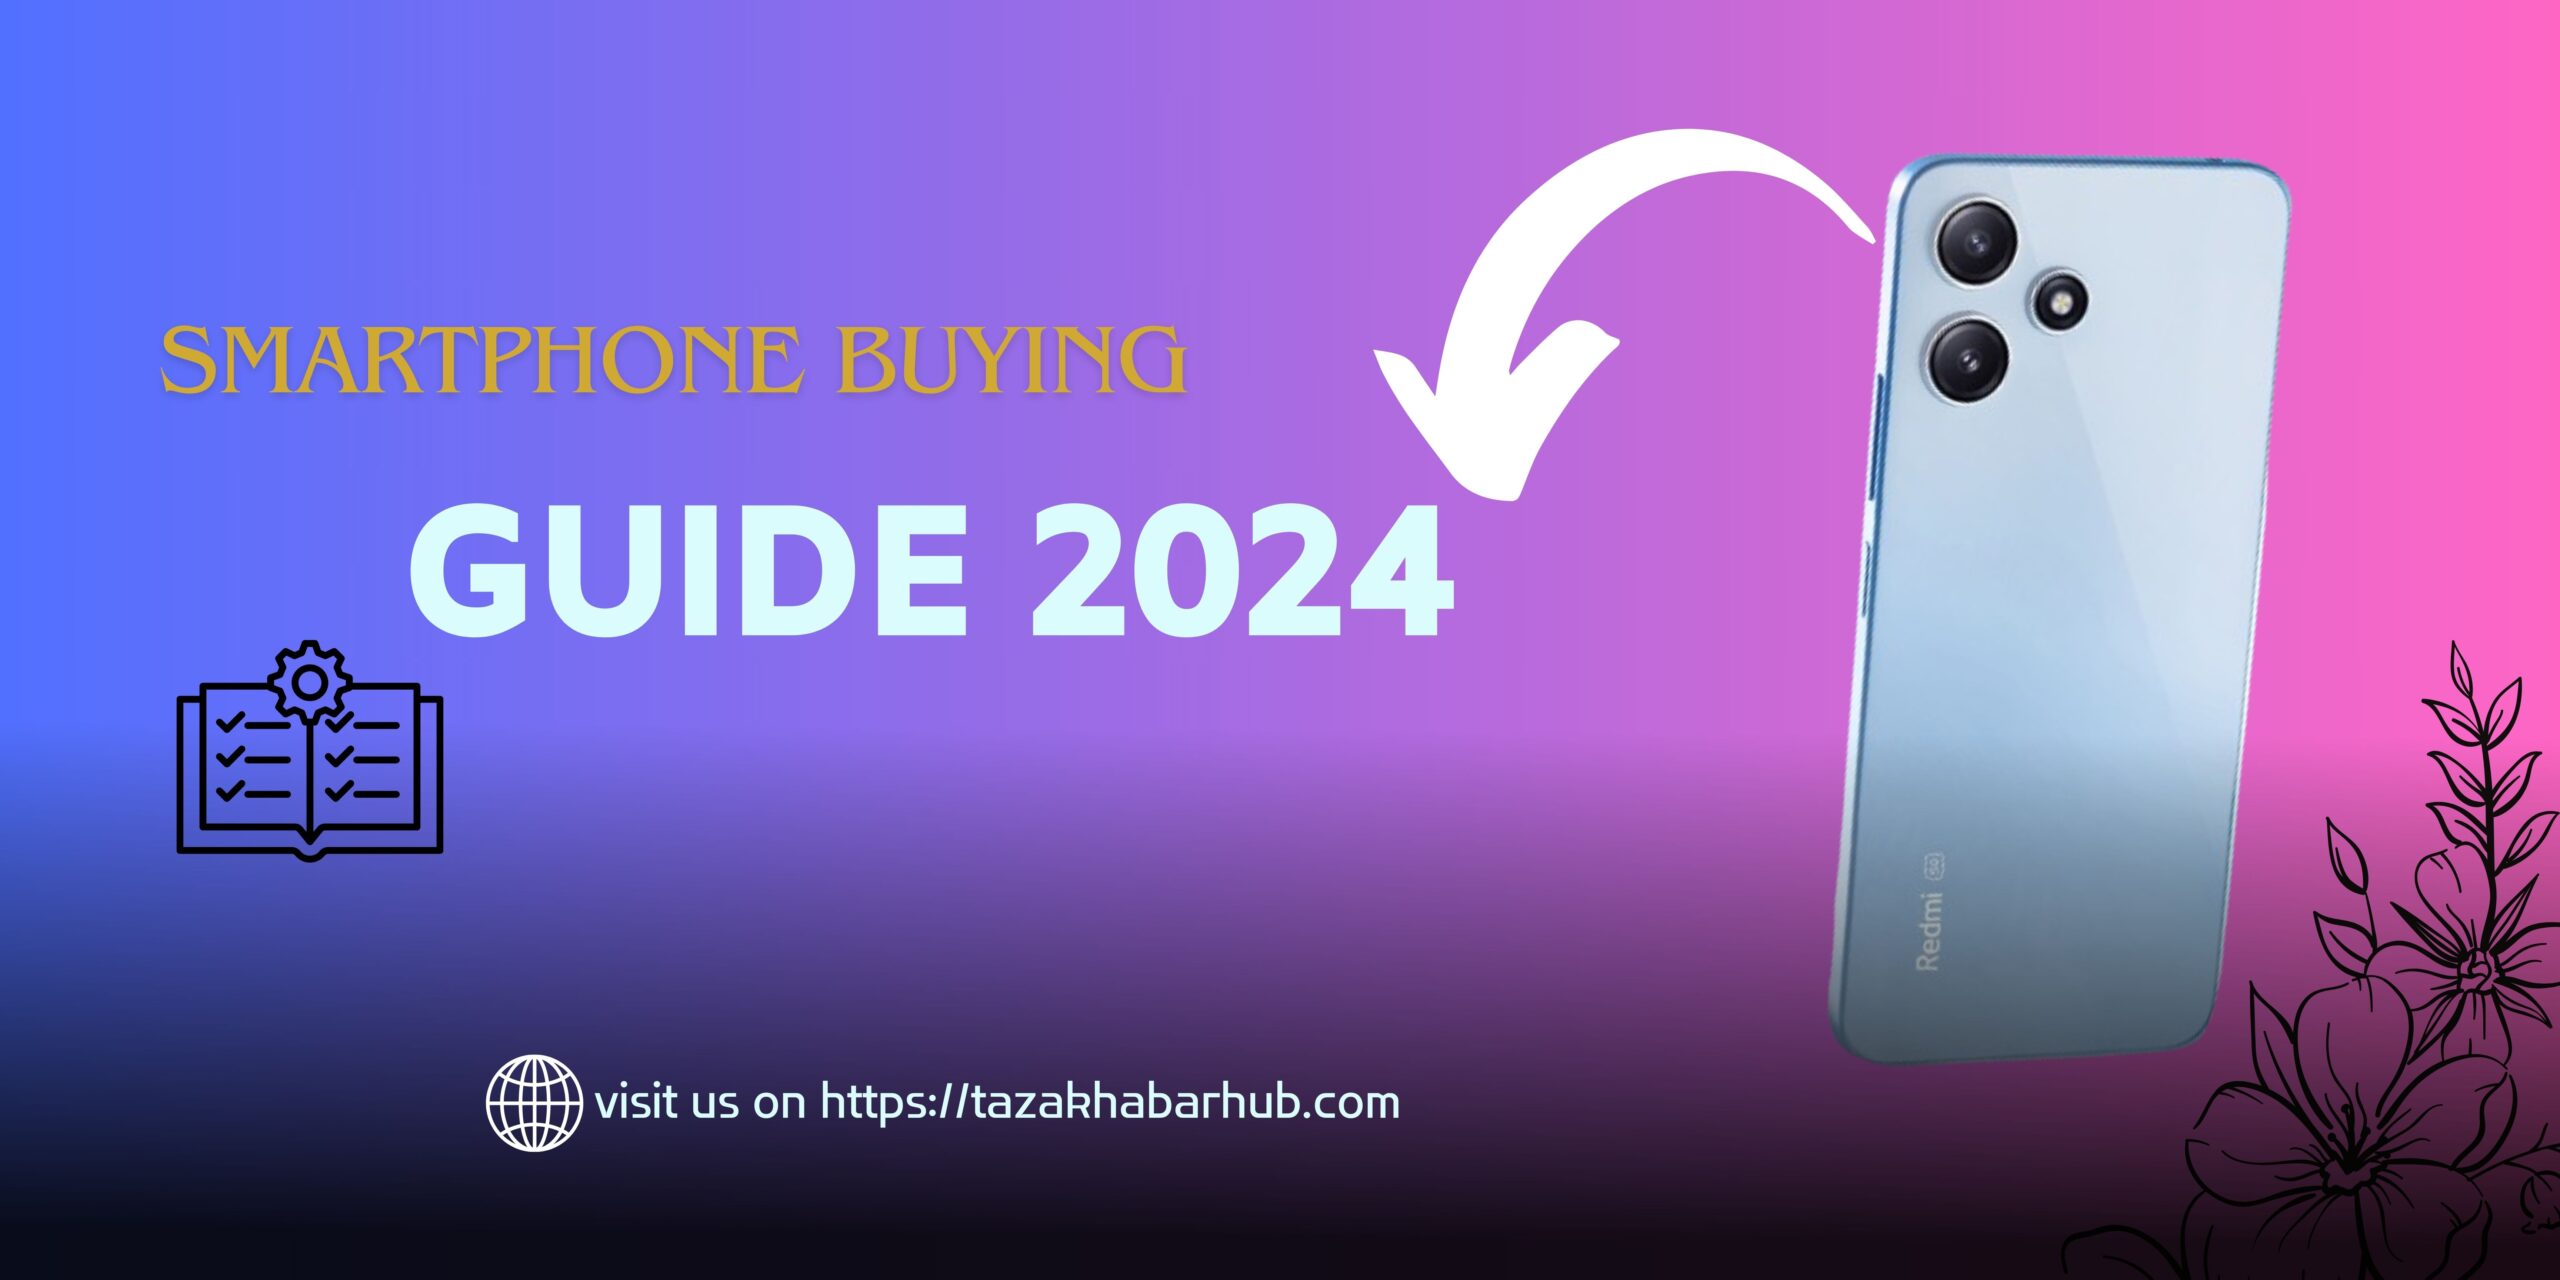 Smartphone Buying Guide 2024